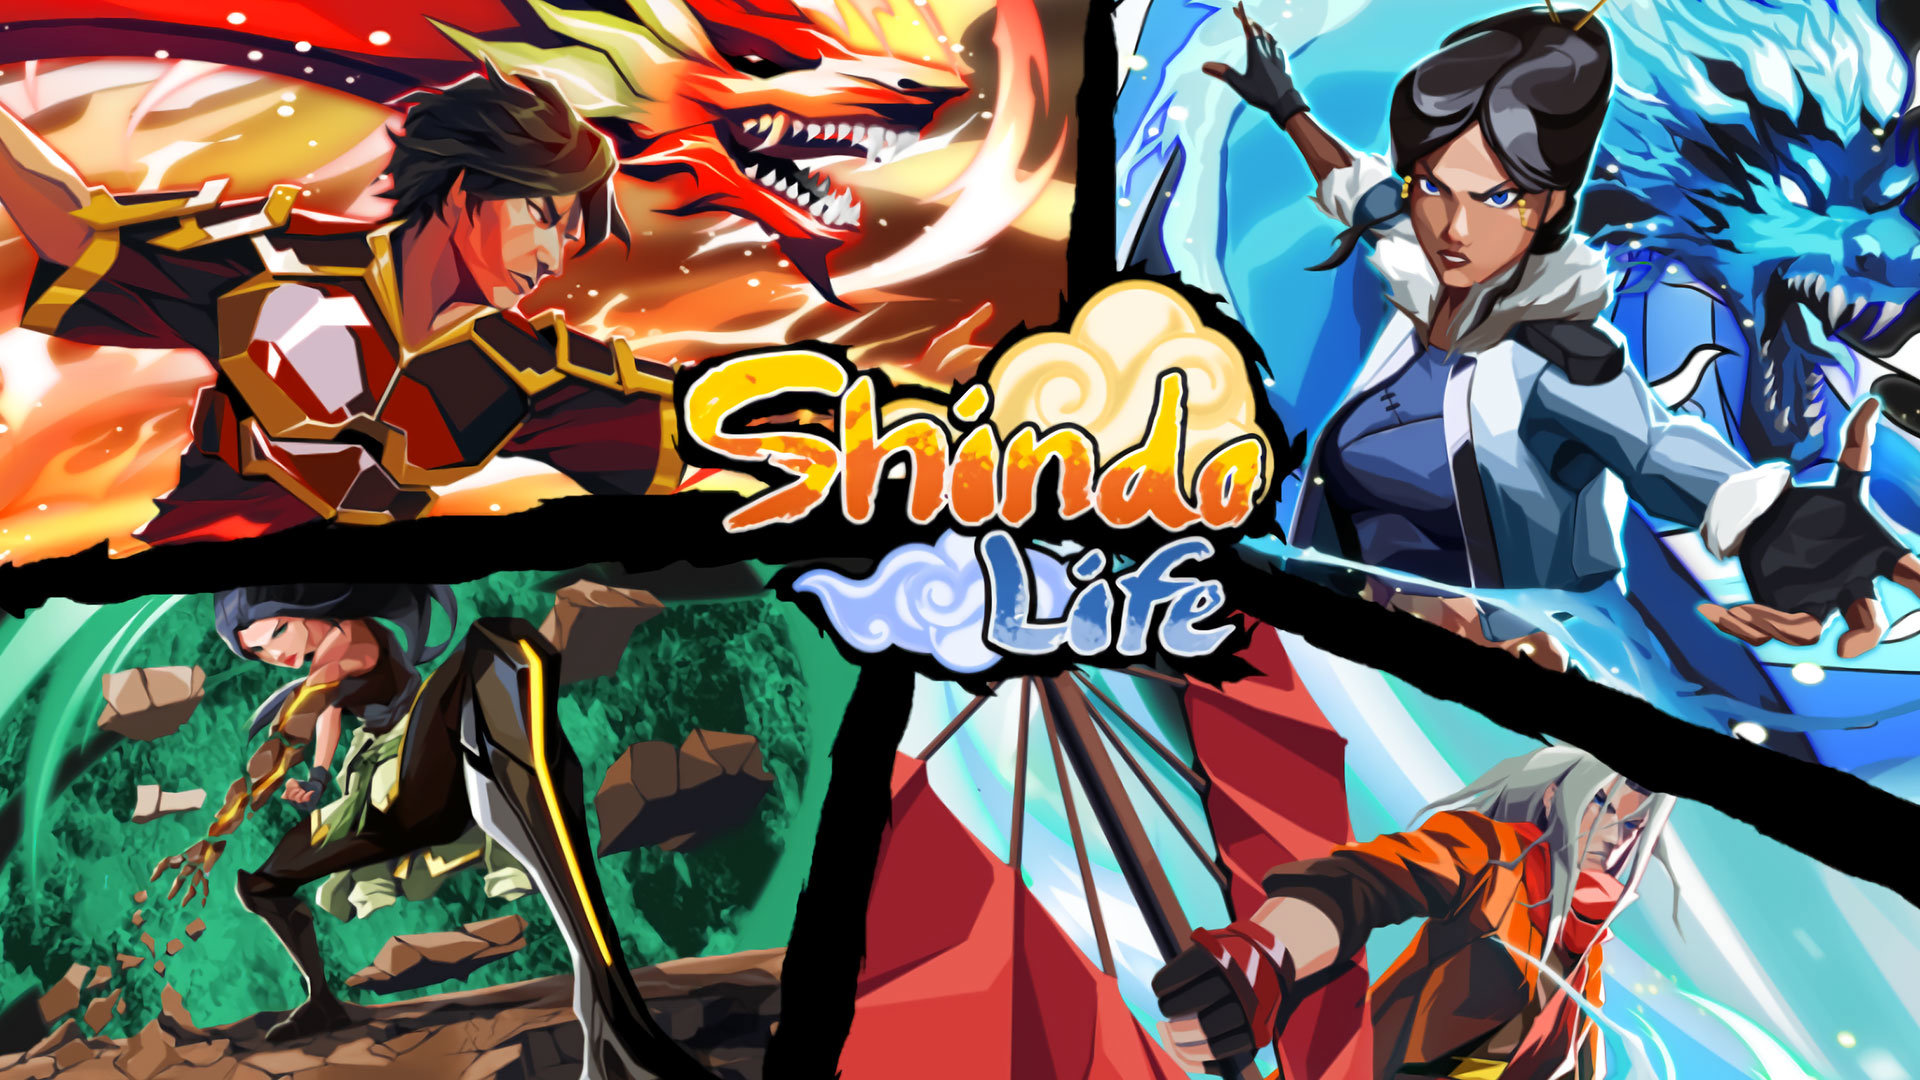 Shindo Life Jejunes Codes - Private Servers October 2023